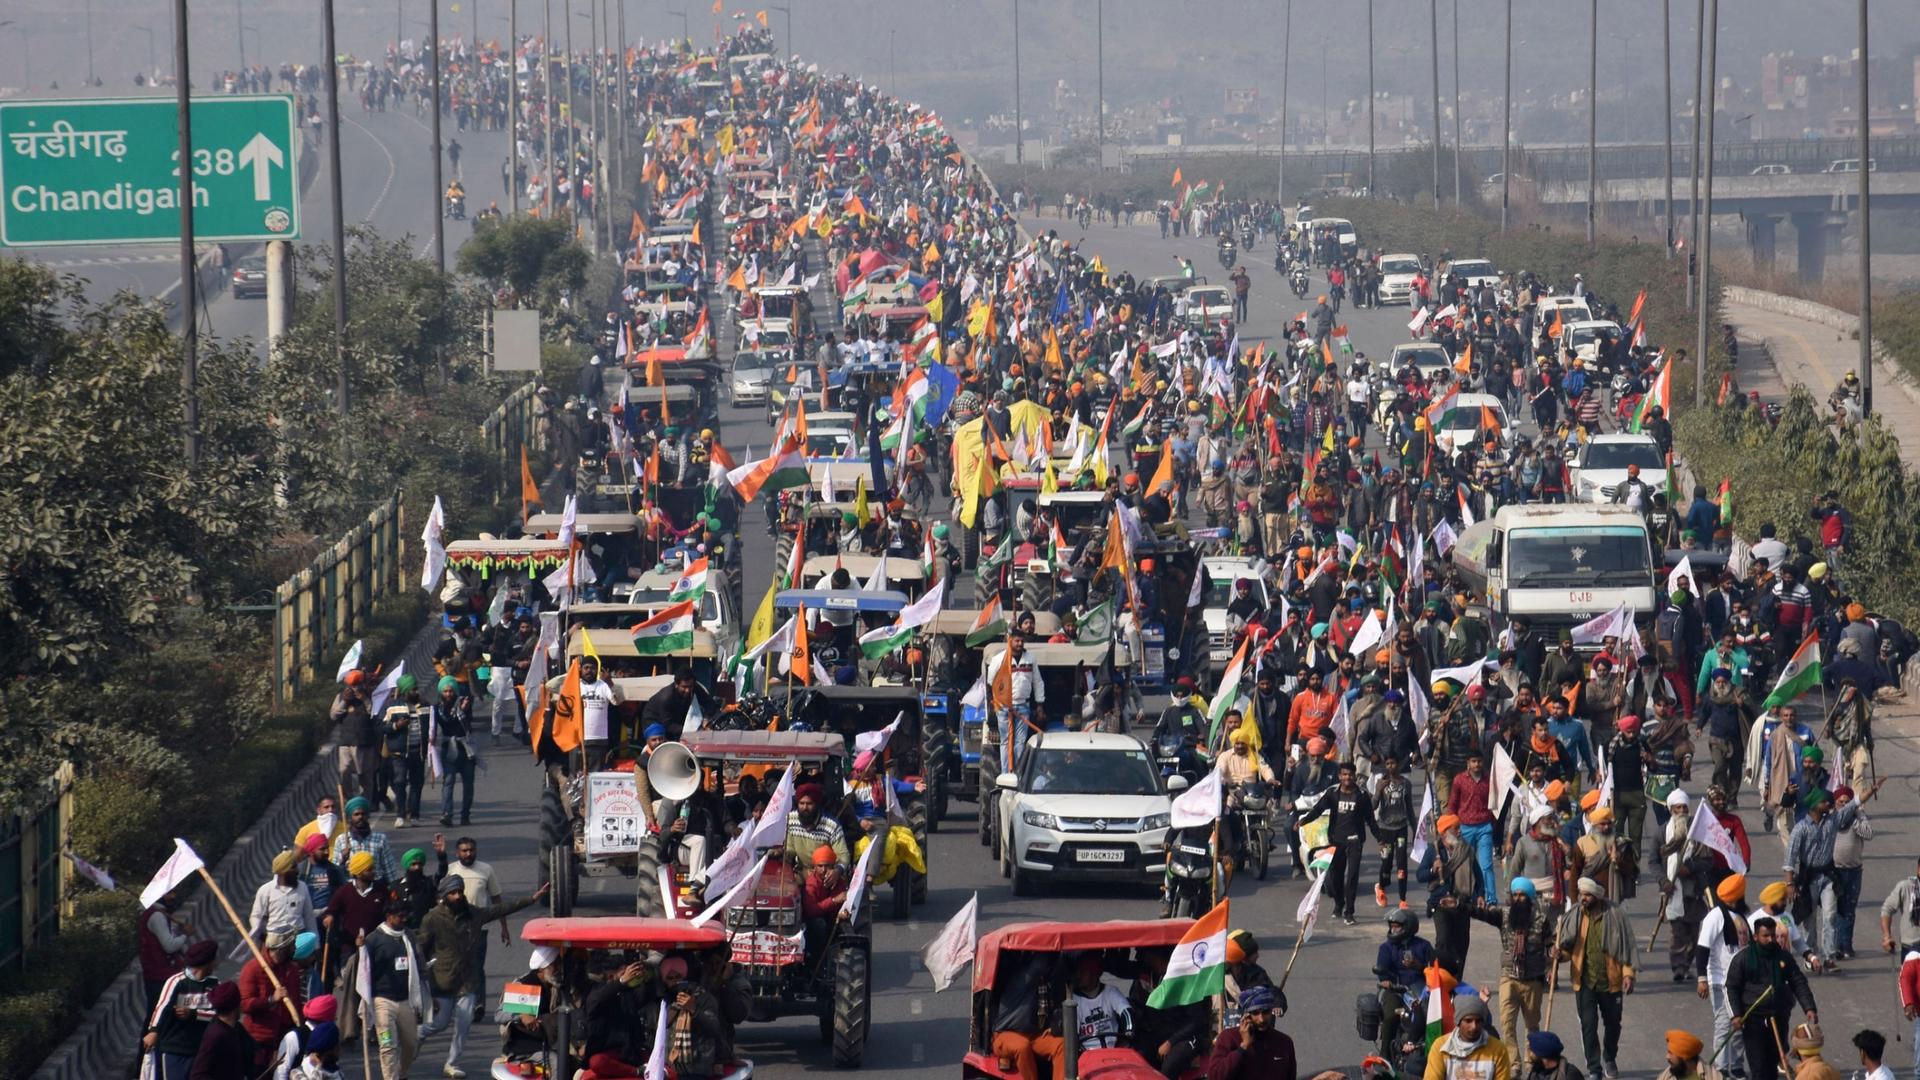 A multiple lane road is shown filled with protesters driving tractors and other vehicles with thousands of people shown all over the road.